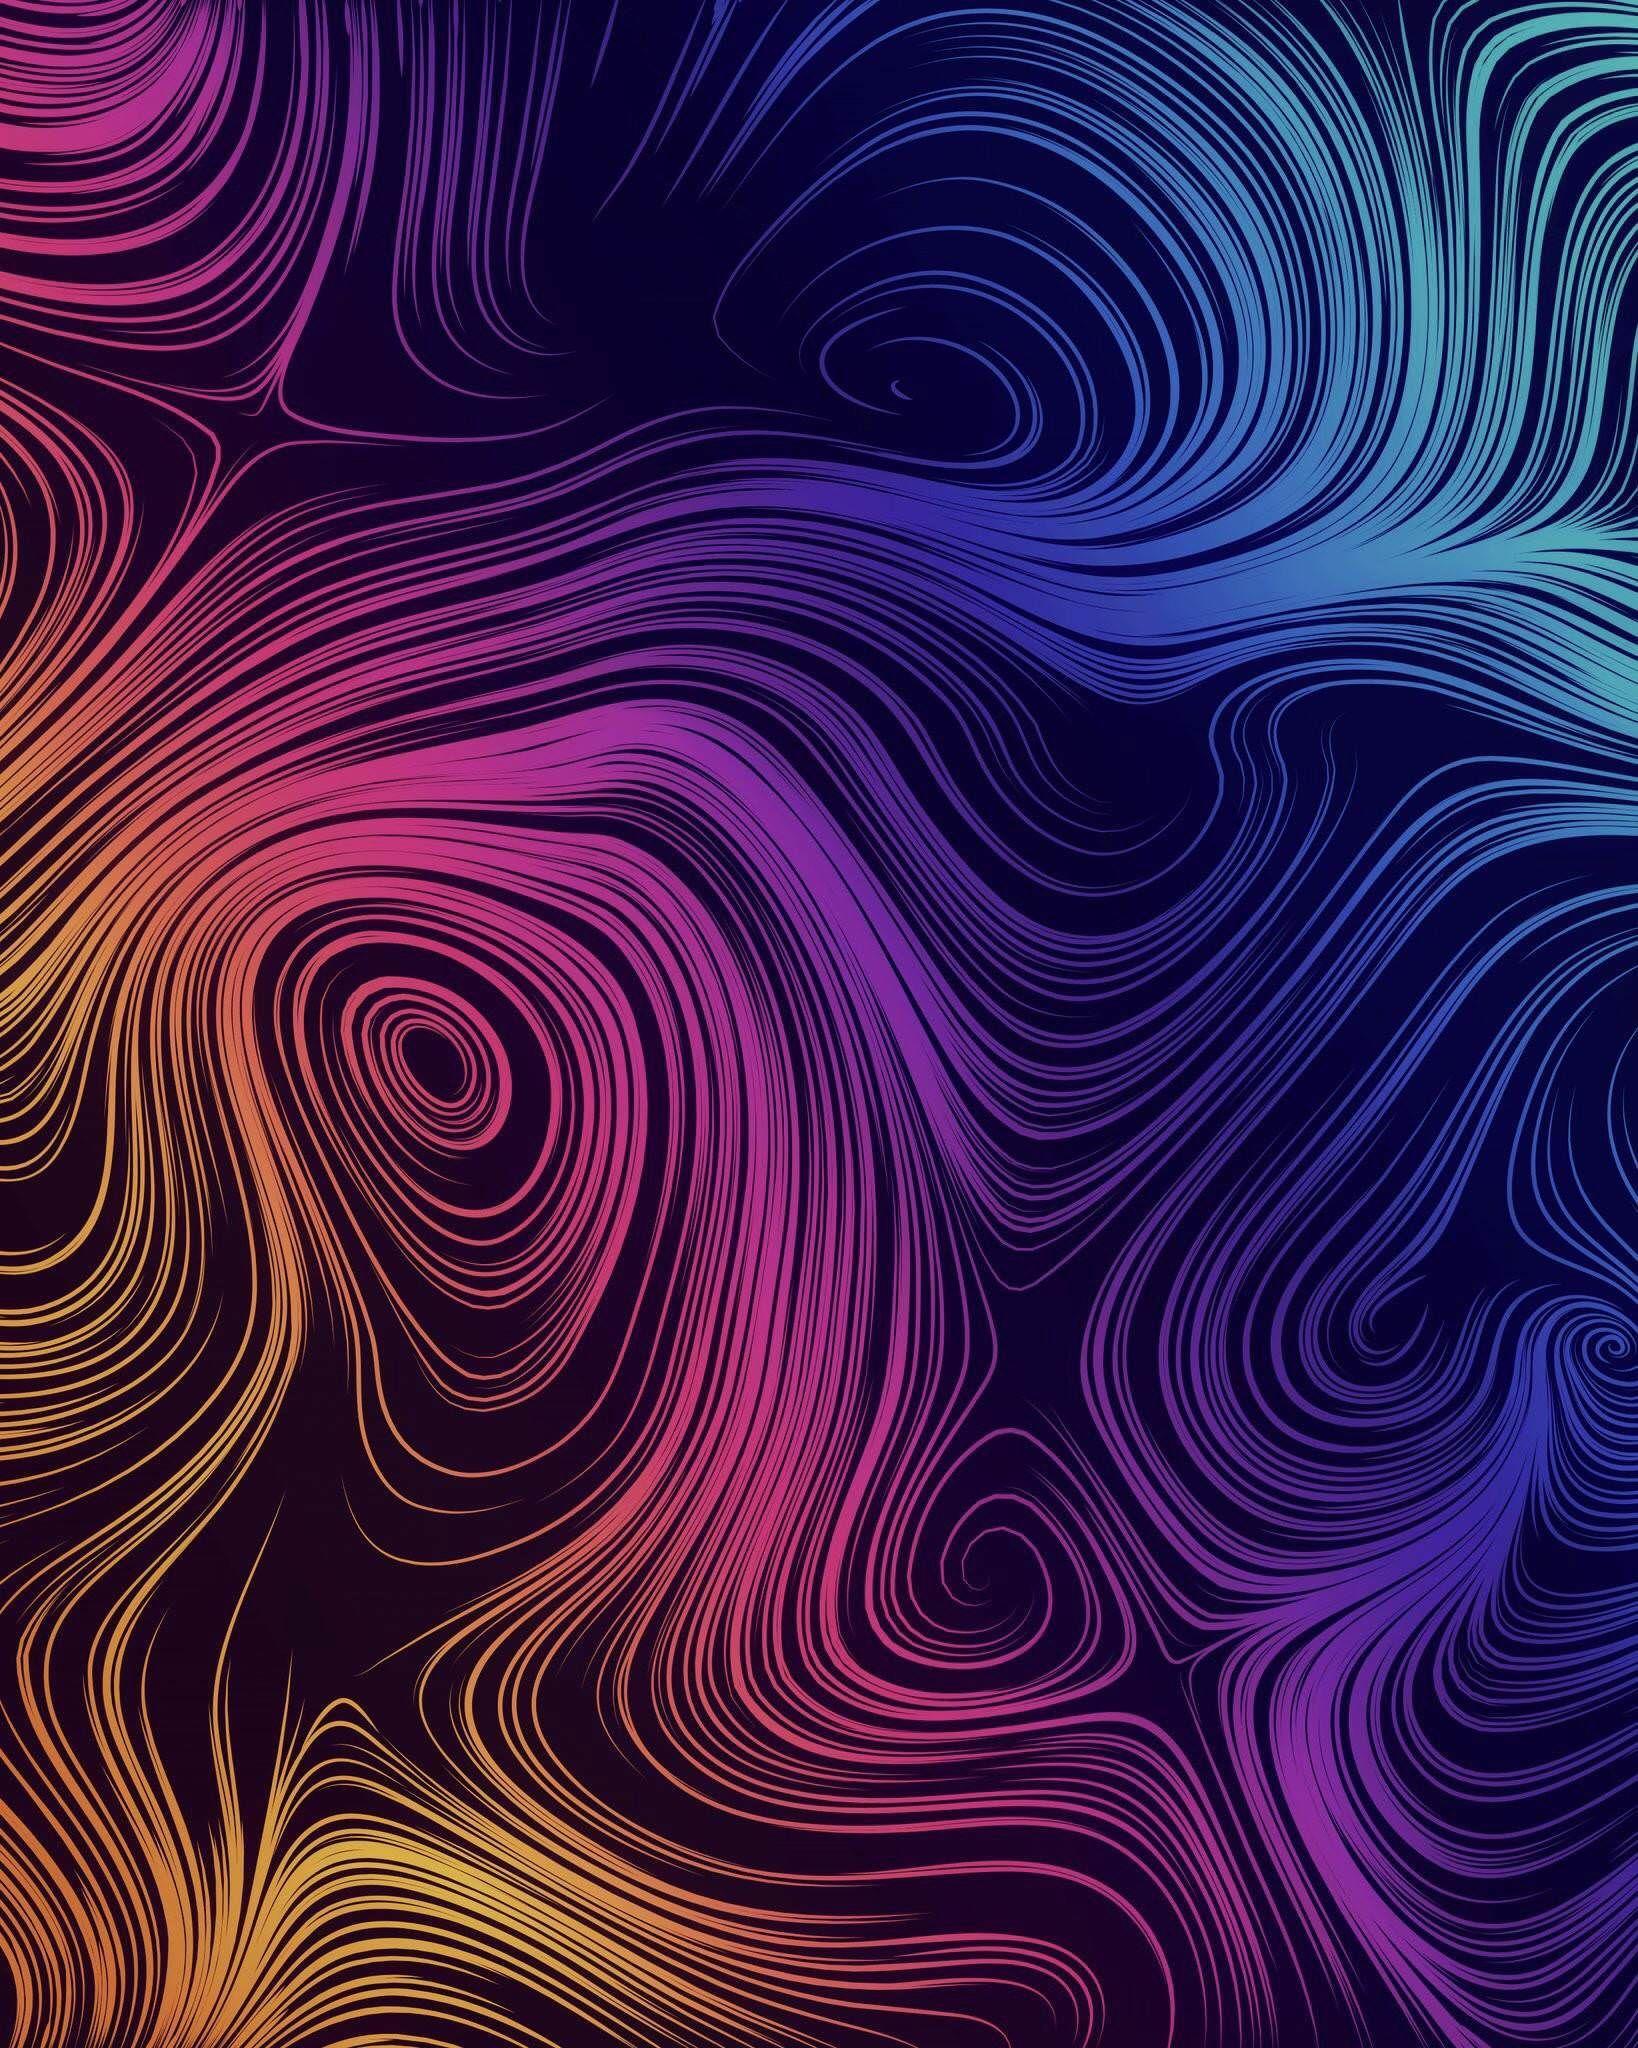 Galaxy S9 Wallpapers - Top Free Galaxy